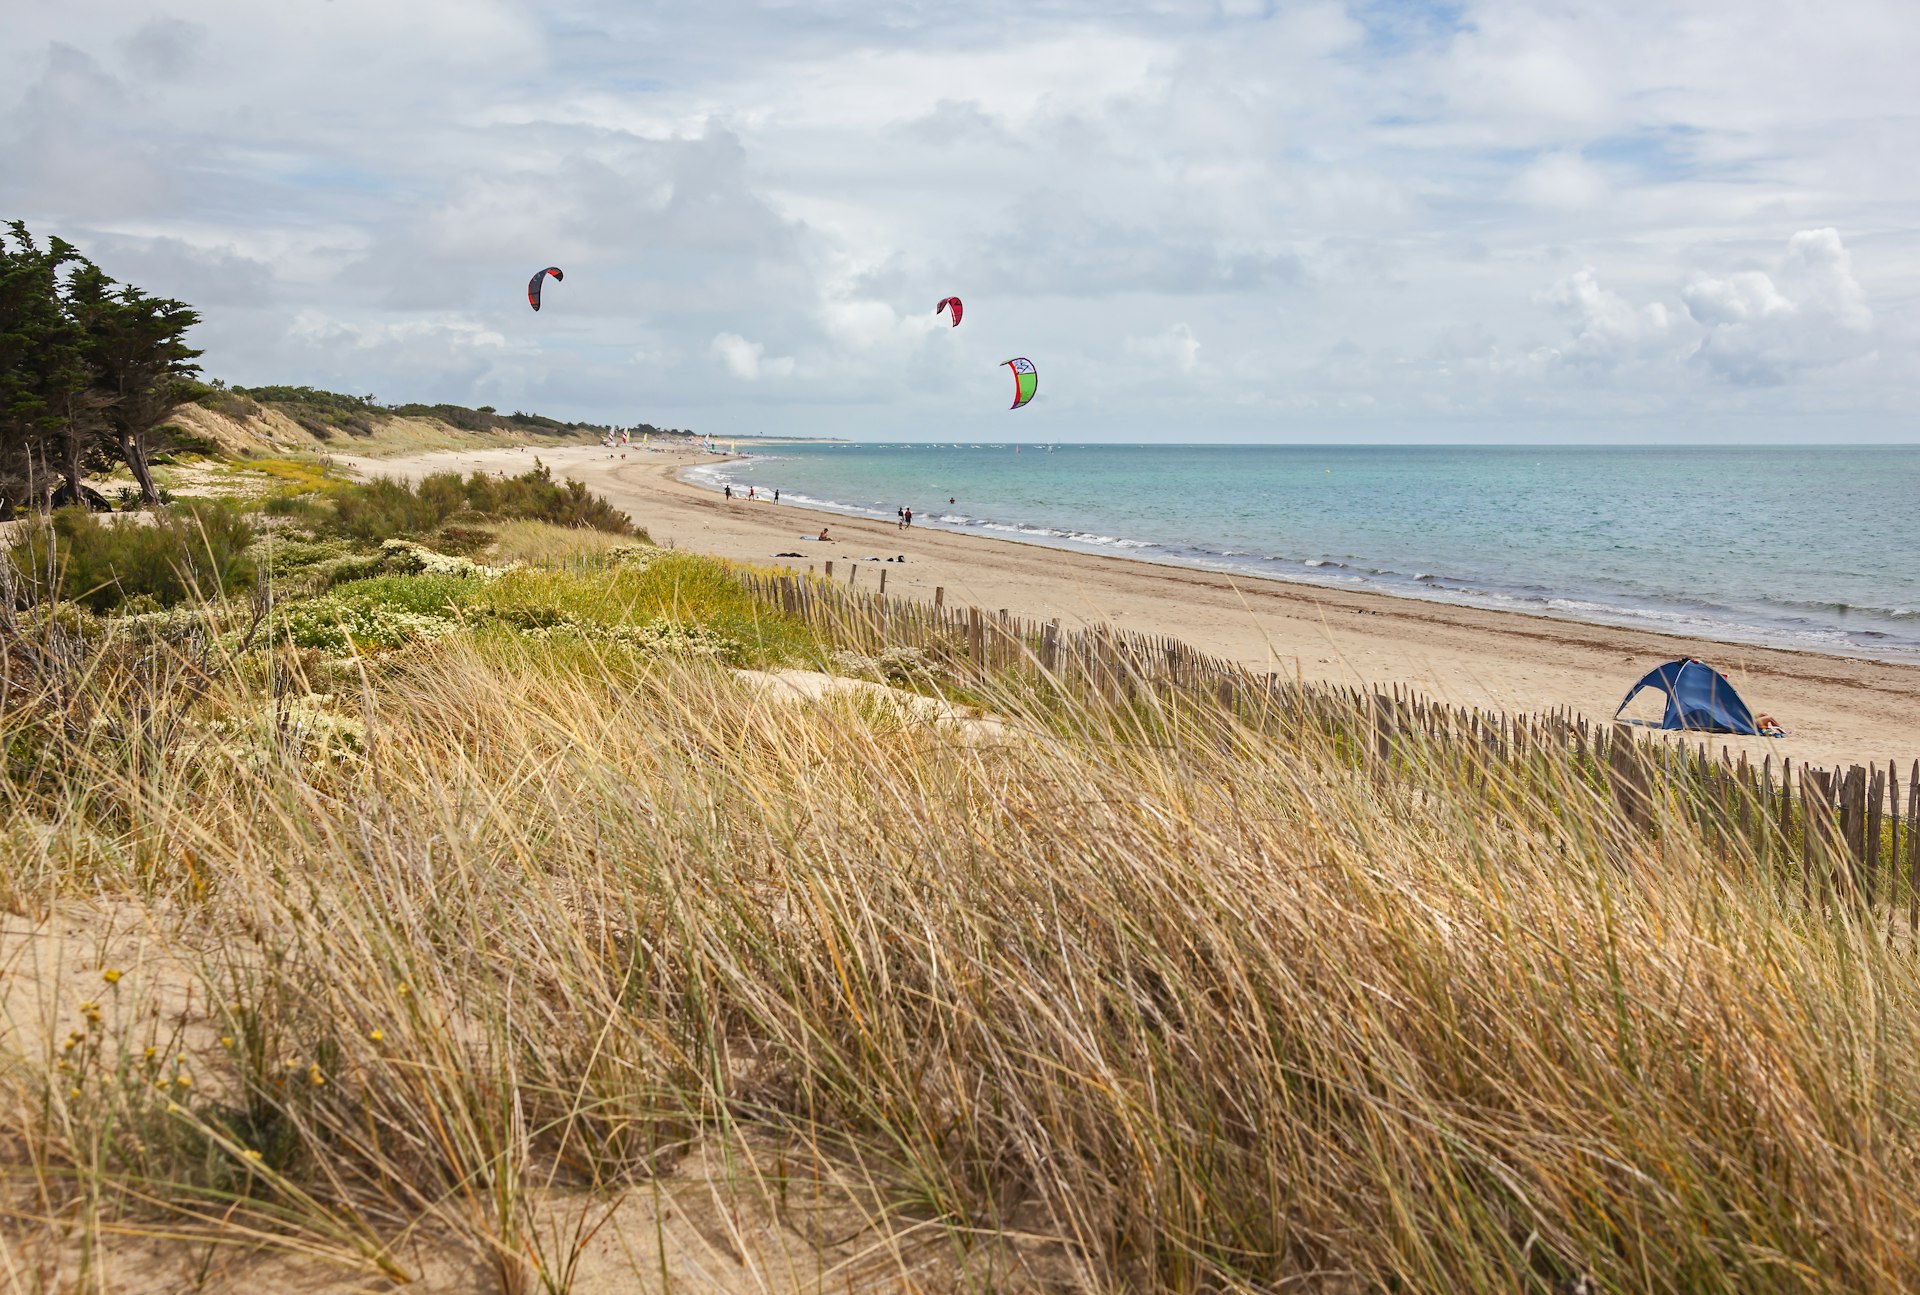 Kite surfing on the deserted Atlantic beach on the island of Ile de Re with dunes covered with grass in the foreground.